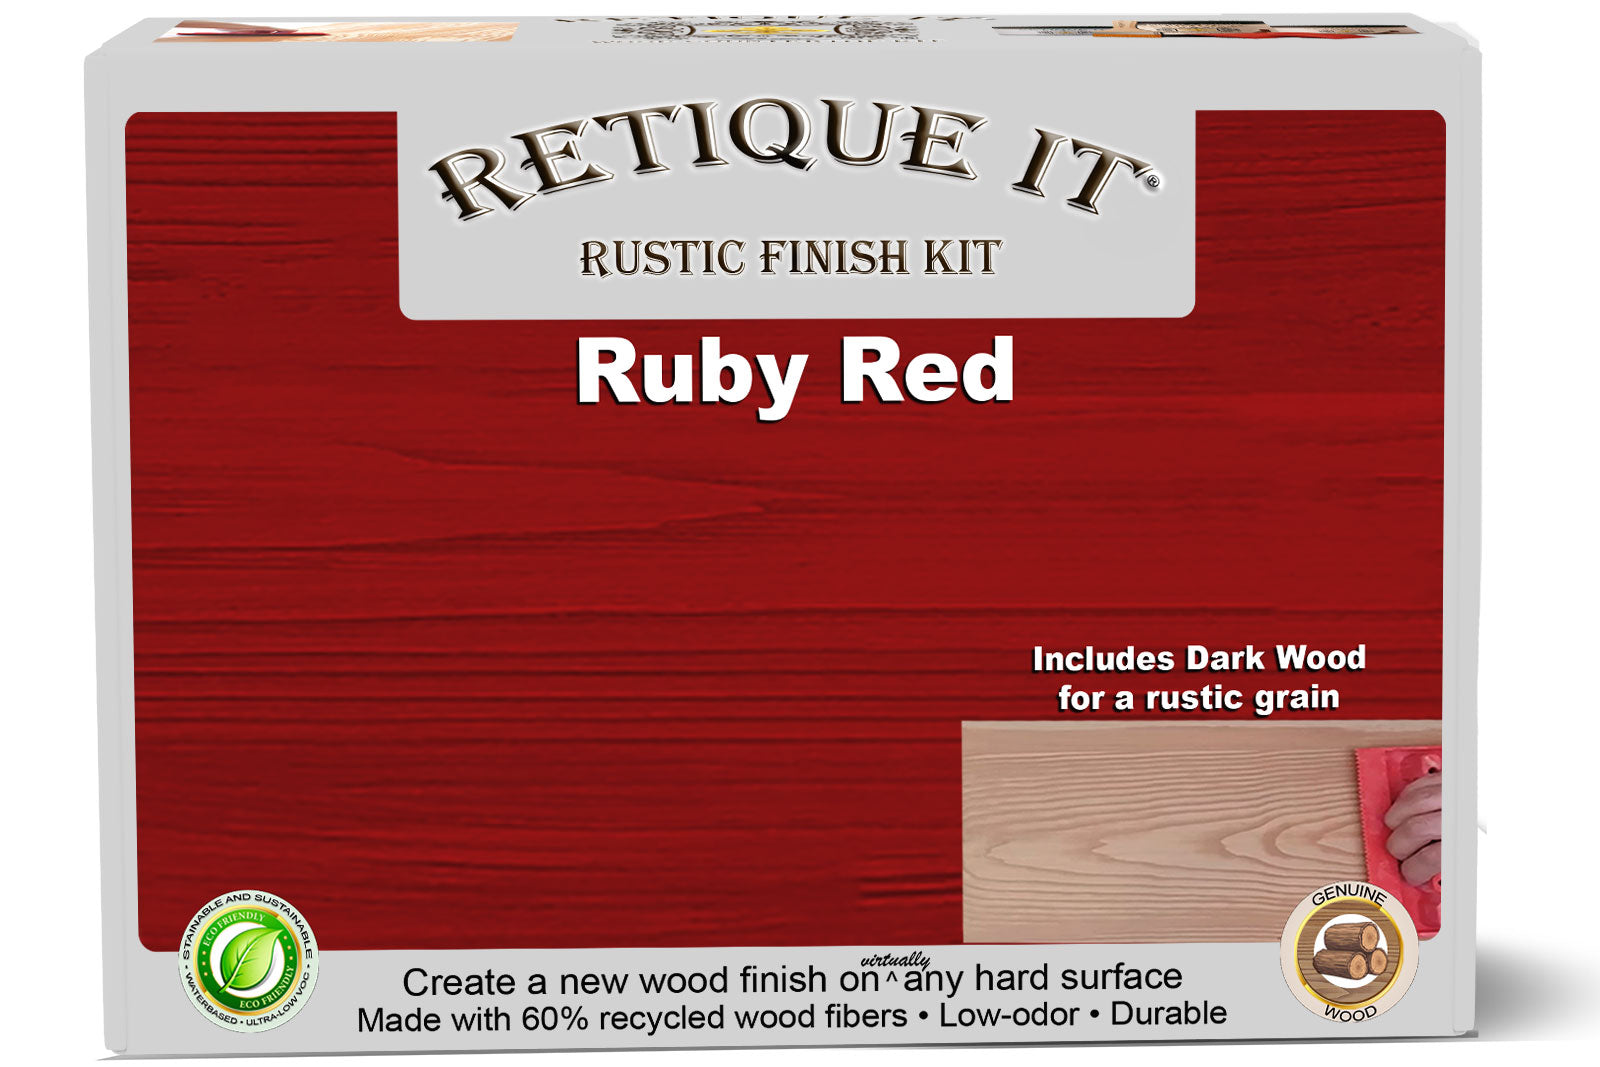 Rustic Finish Kit - Ruby Red